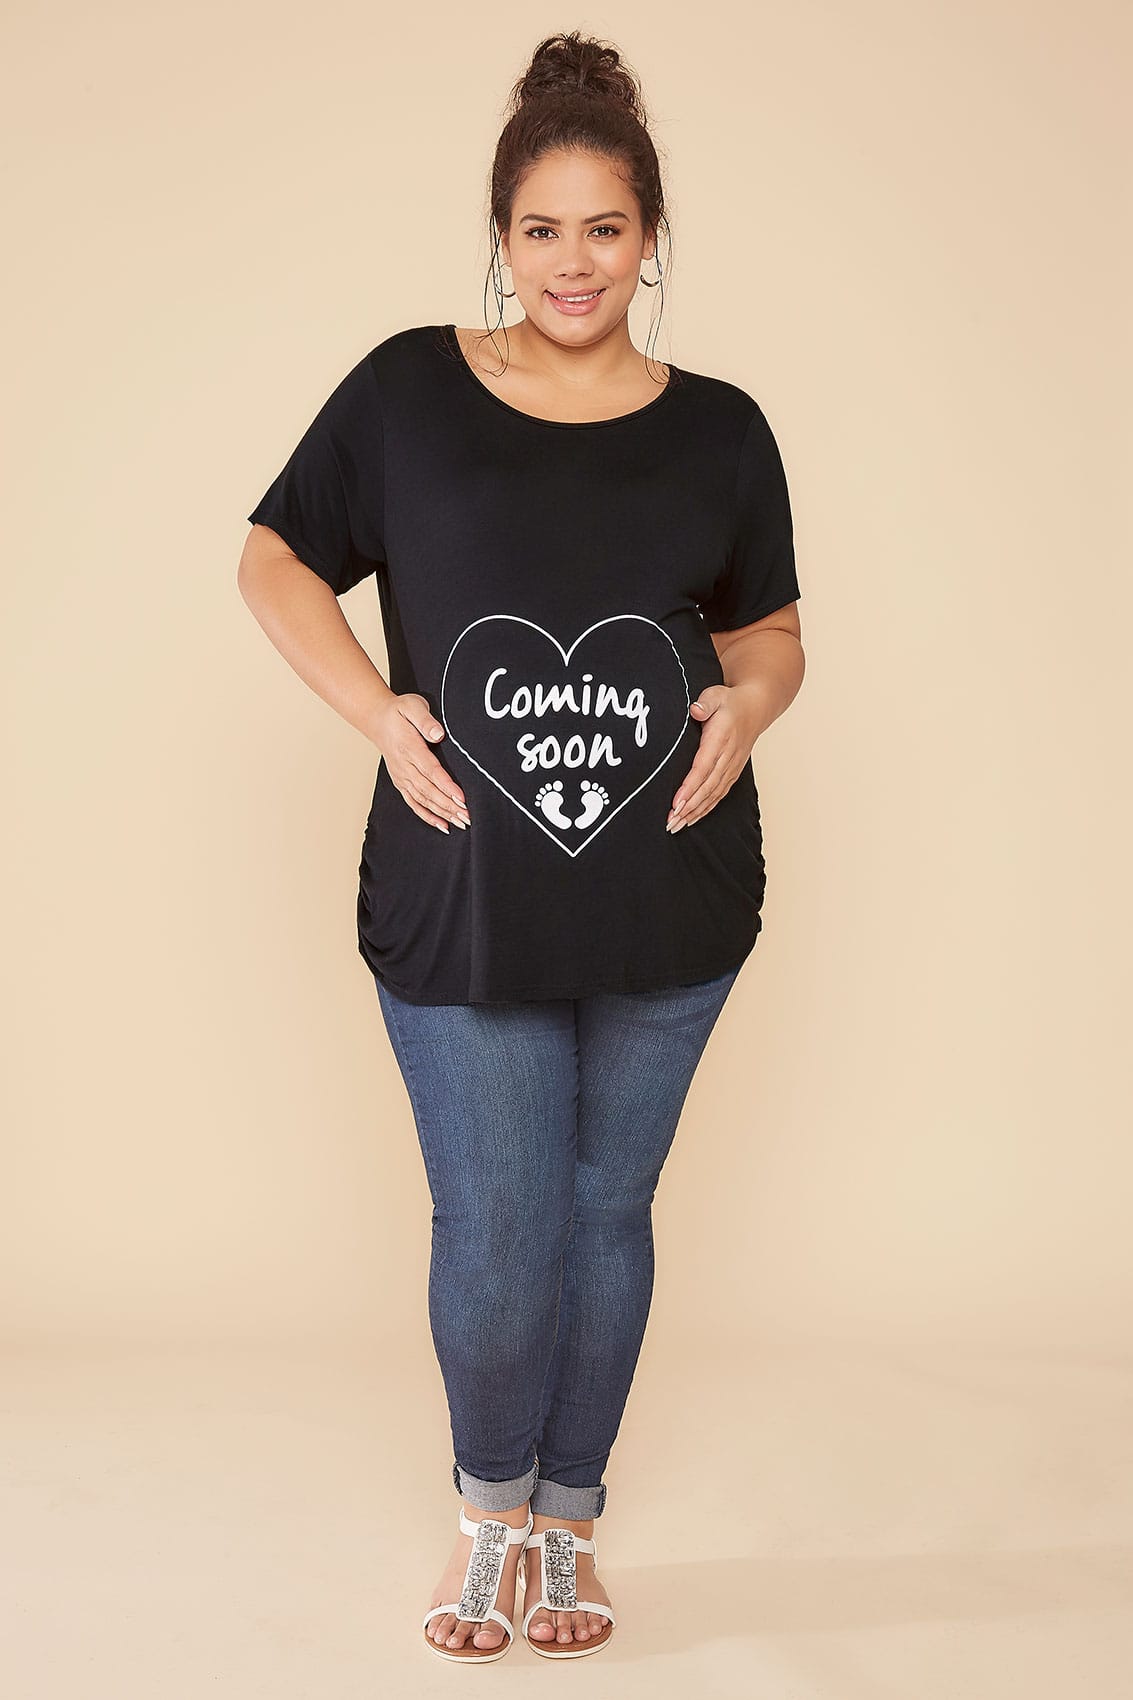 Bump It Up Maternity Black Top With White Glitter Coming -5750